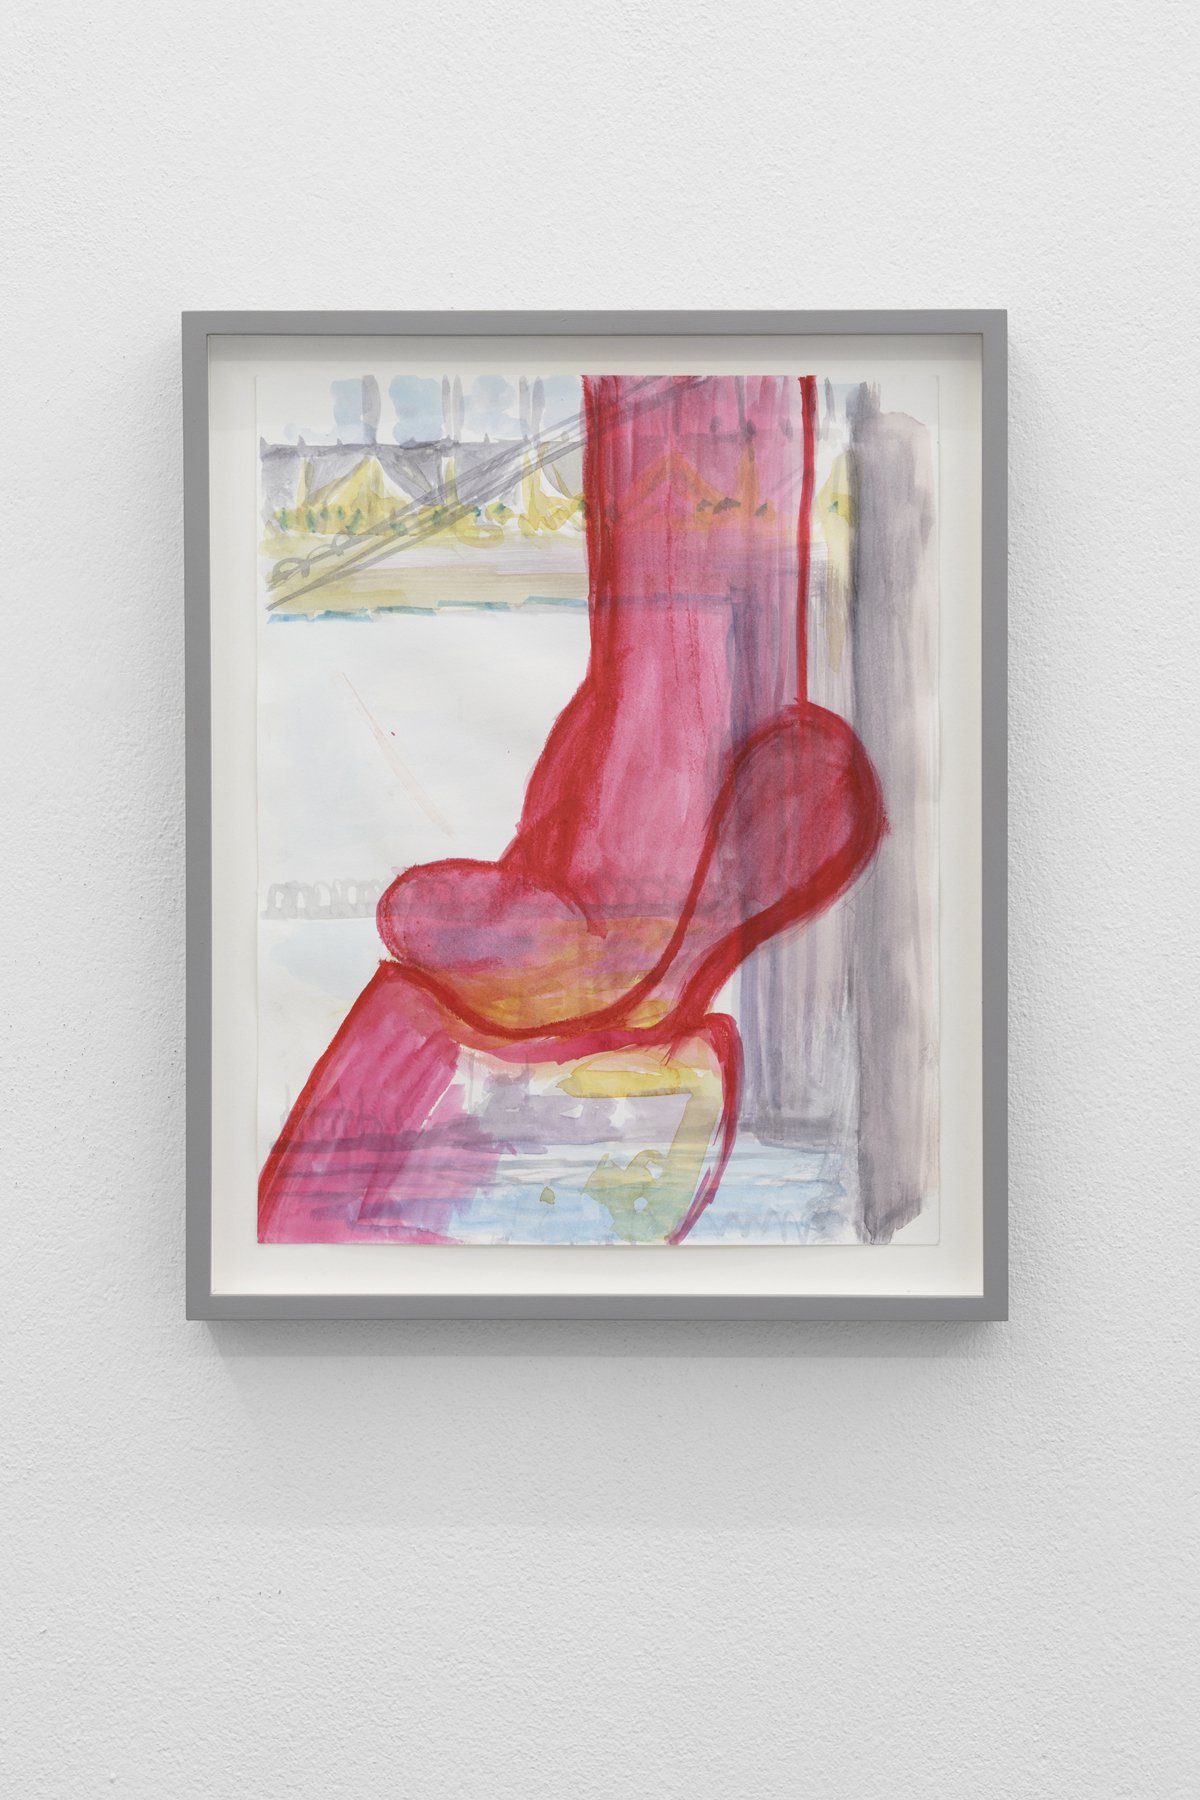 Lena HenkeUntitled, 2020Watercolor and pastels on paper35 x 28 cm